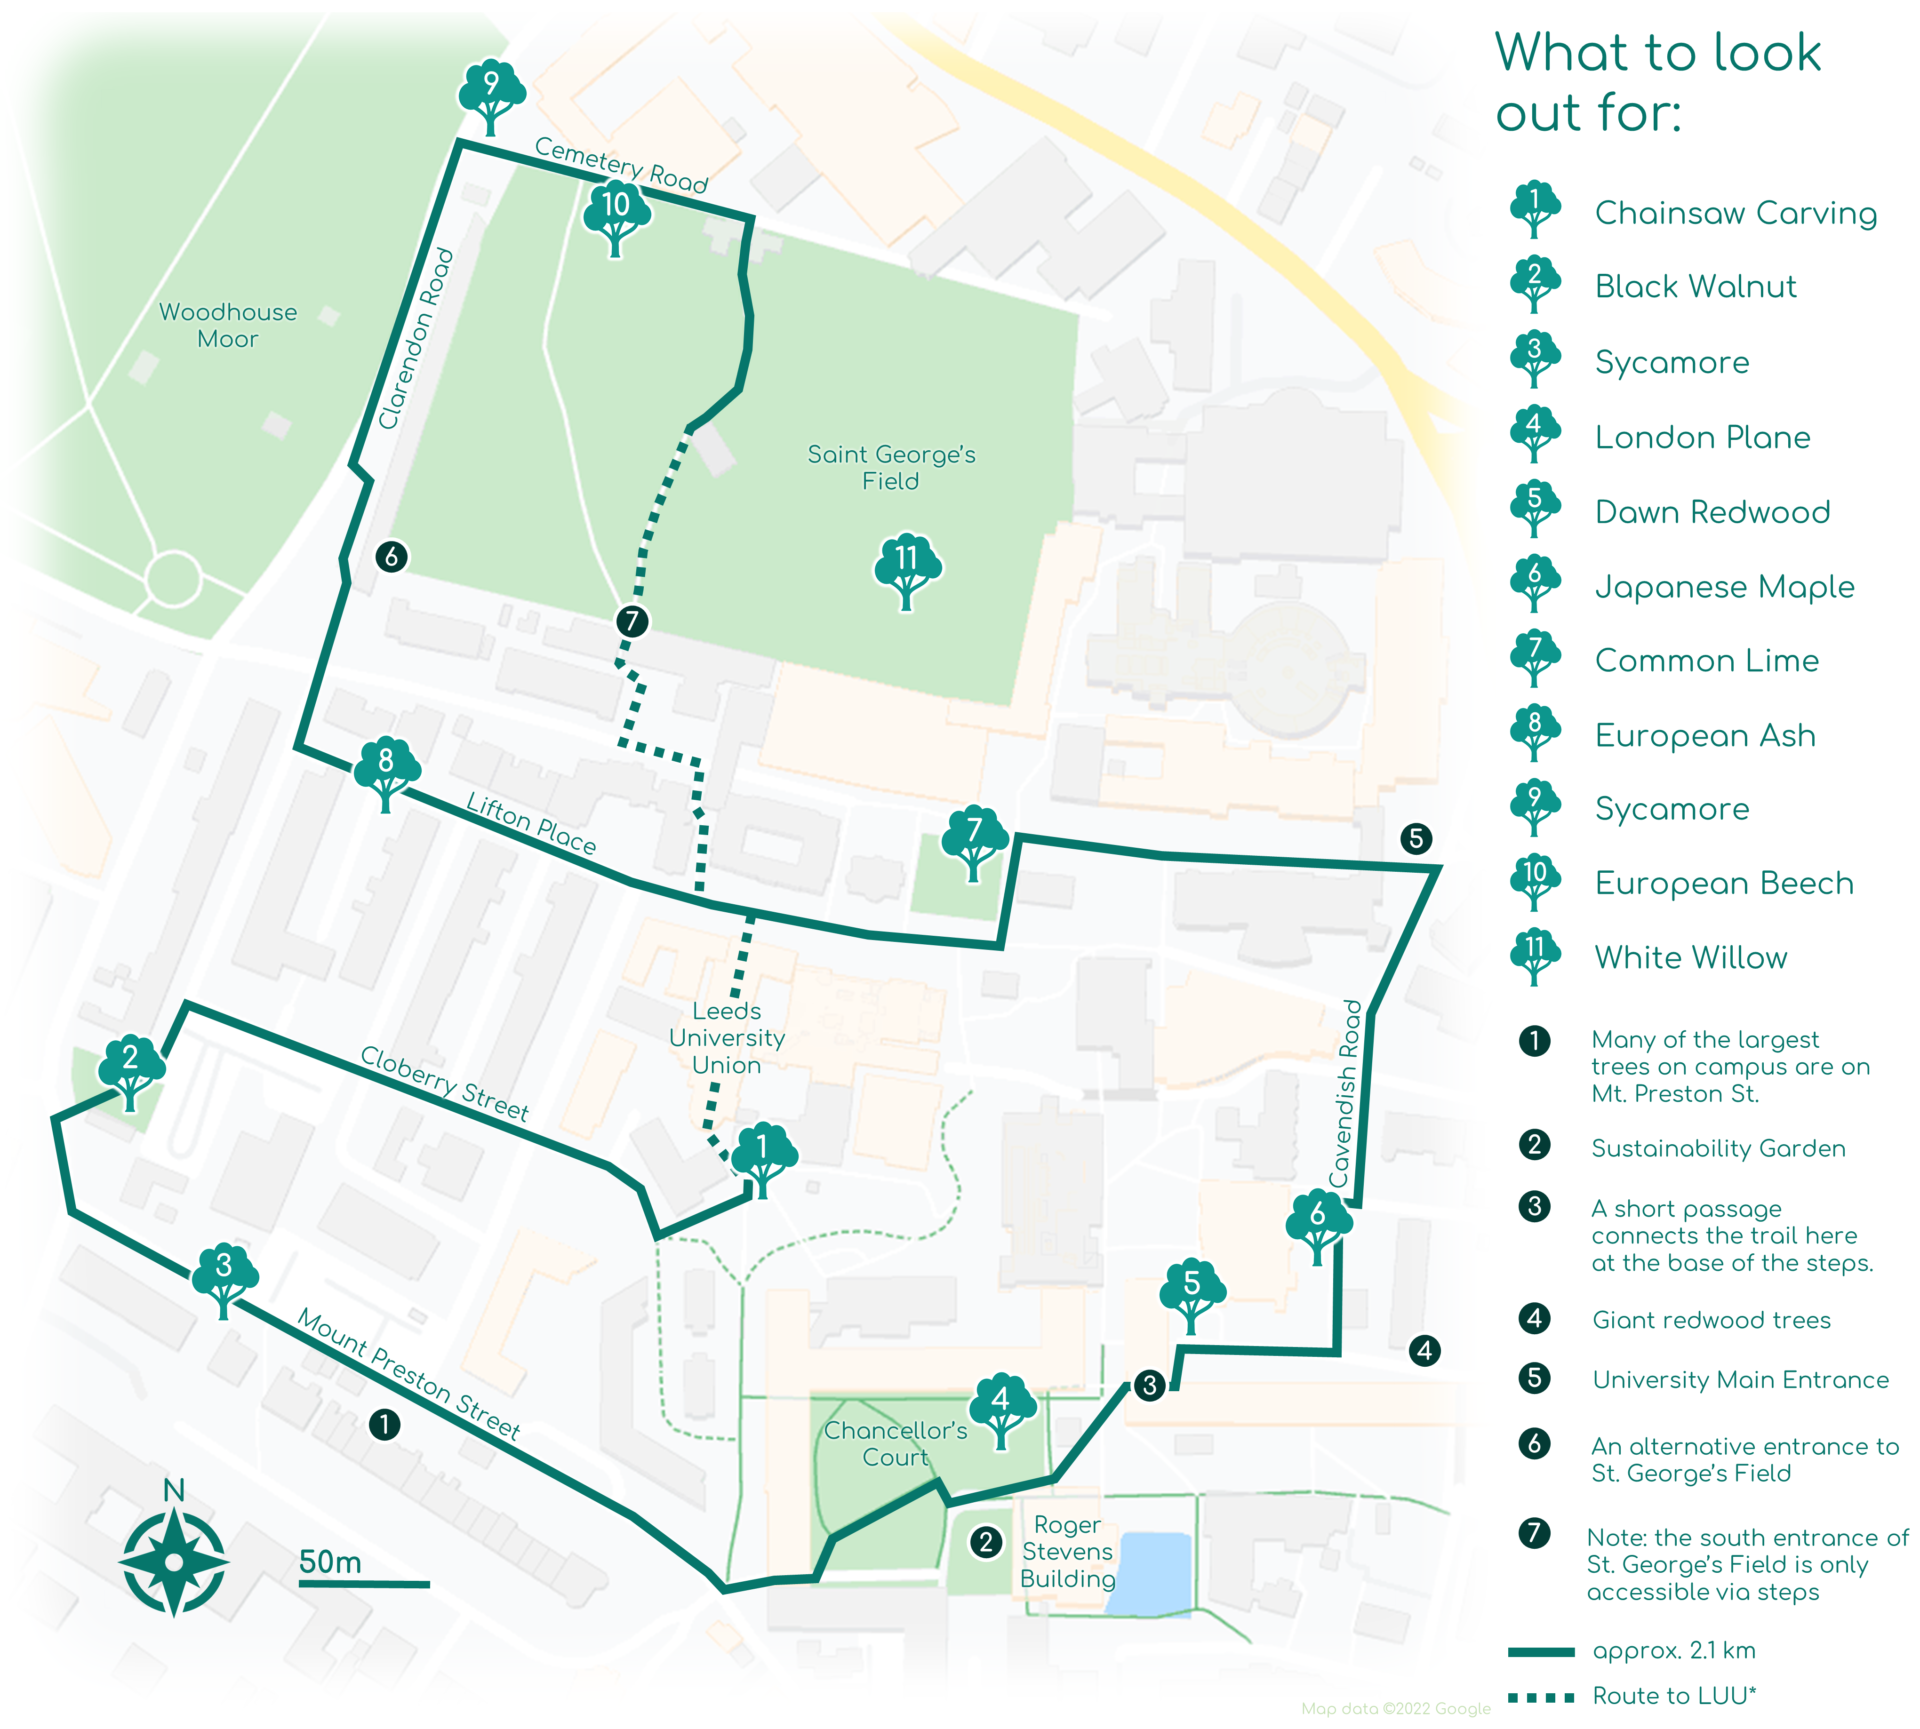 Campus Map of with marked route and trees. See Google Maps link above for accessible directions with each tree as a destination along the route